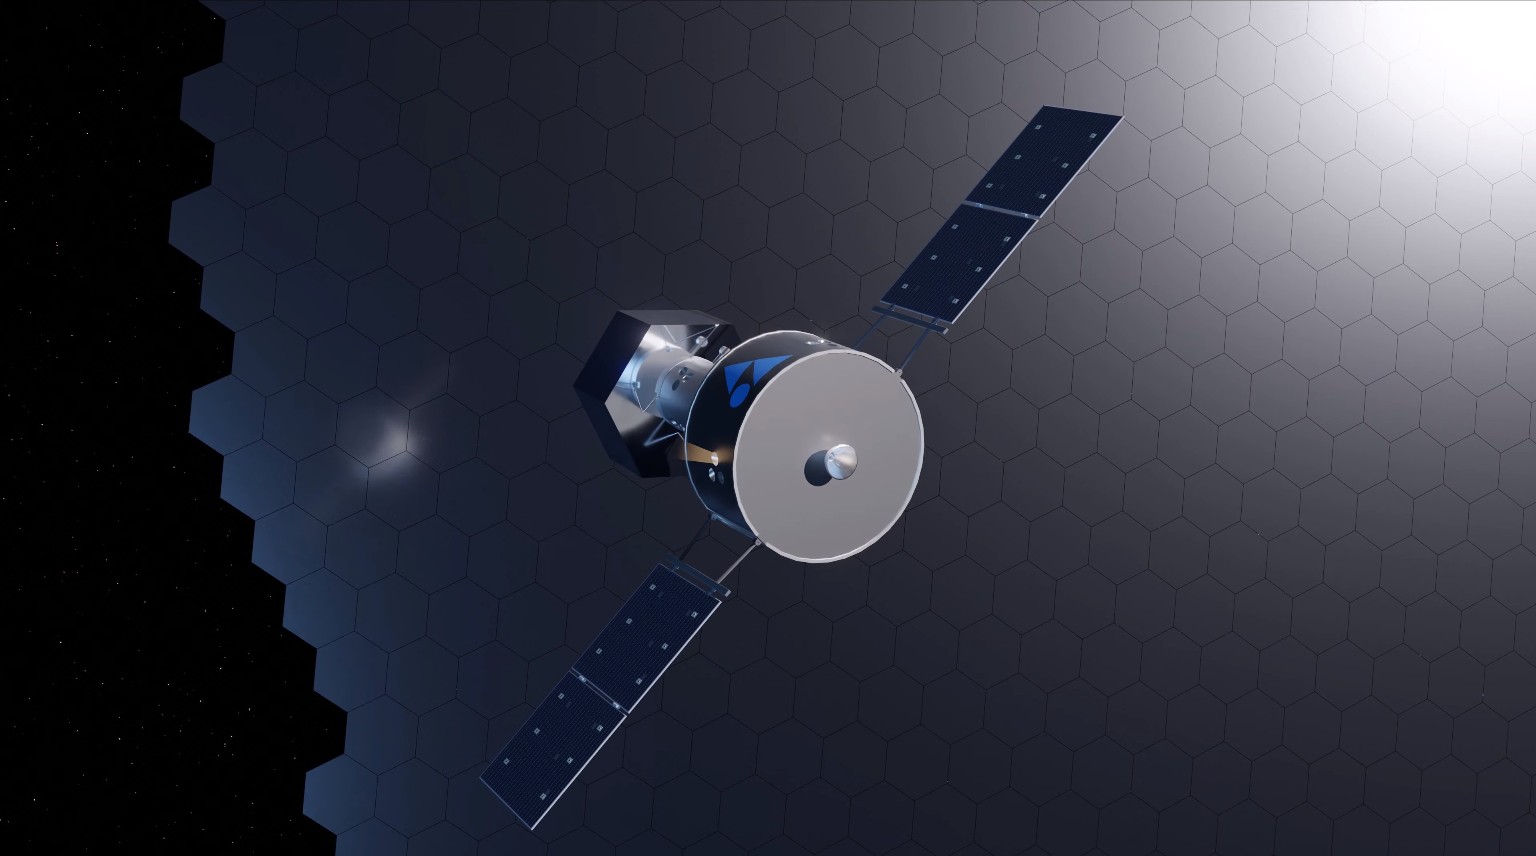 spacex's starship could help this start-up beam clean energy from space. here's how (video)